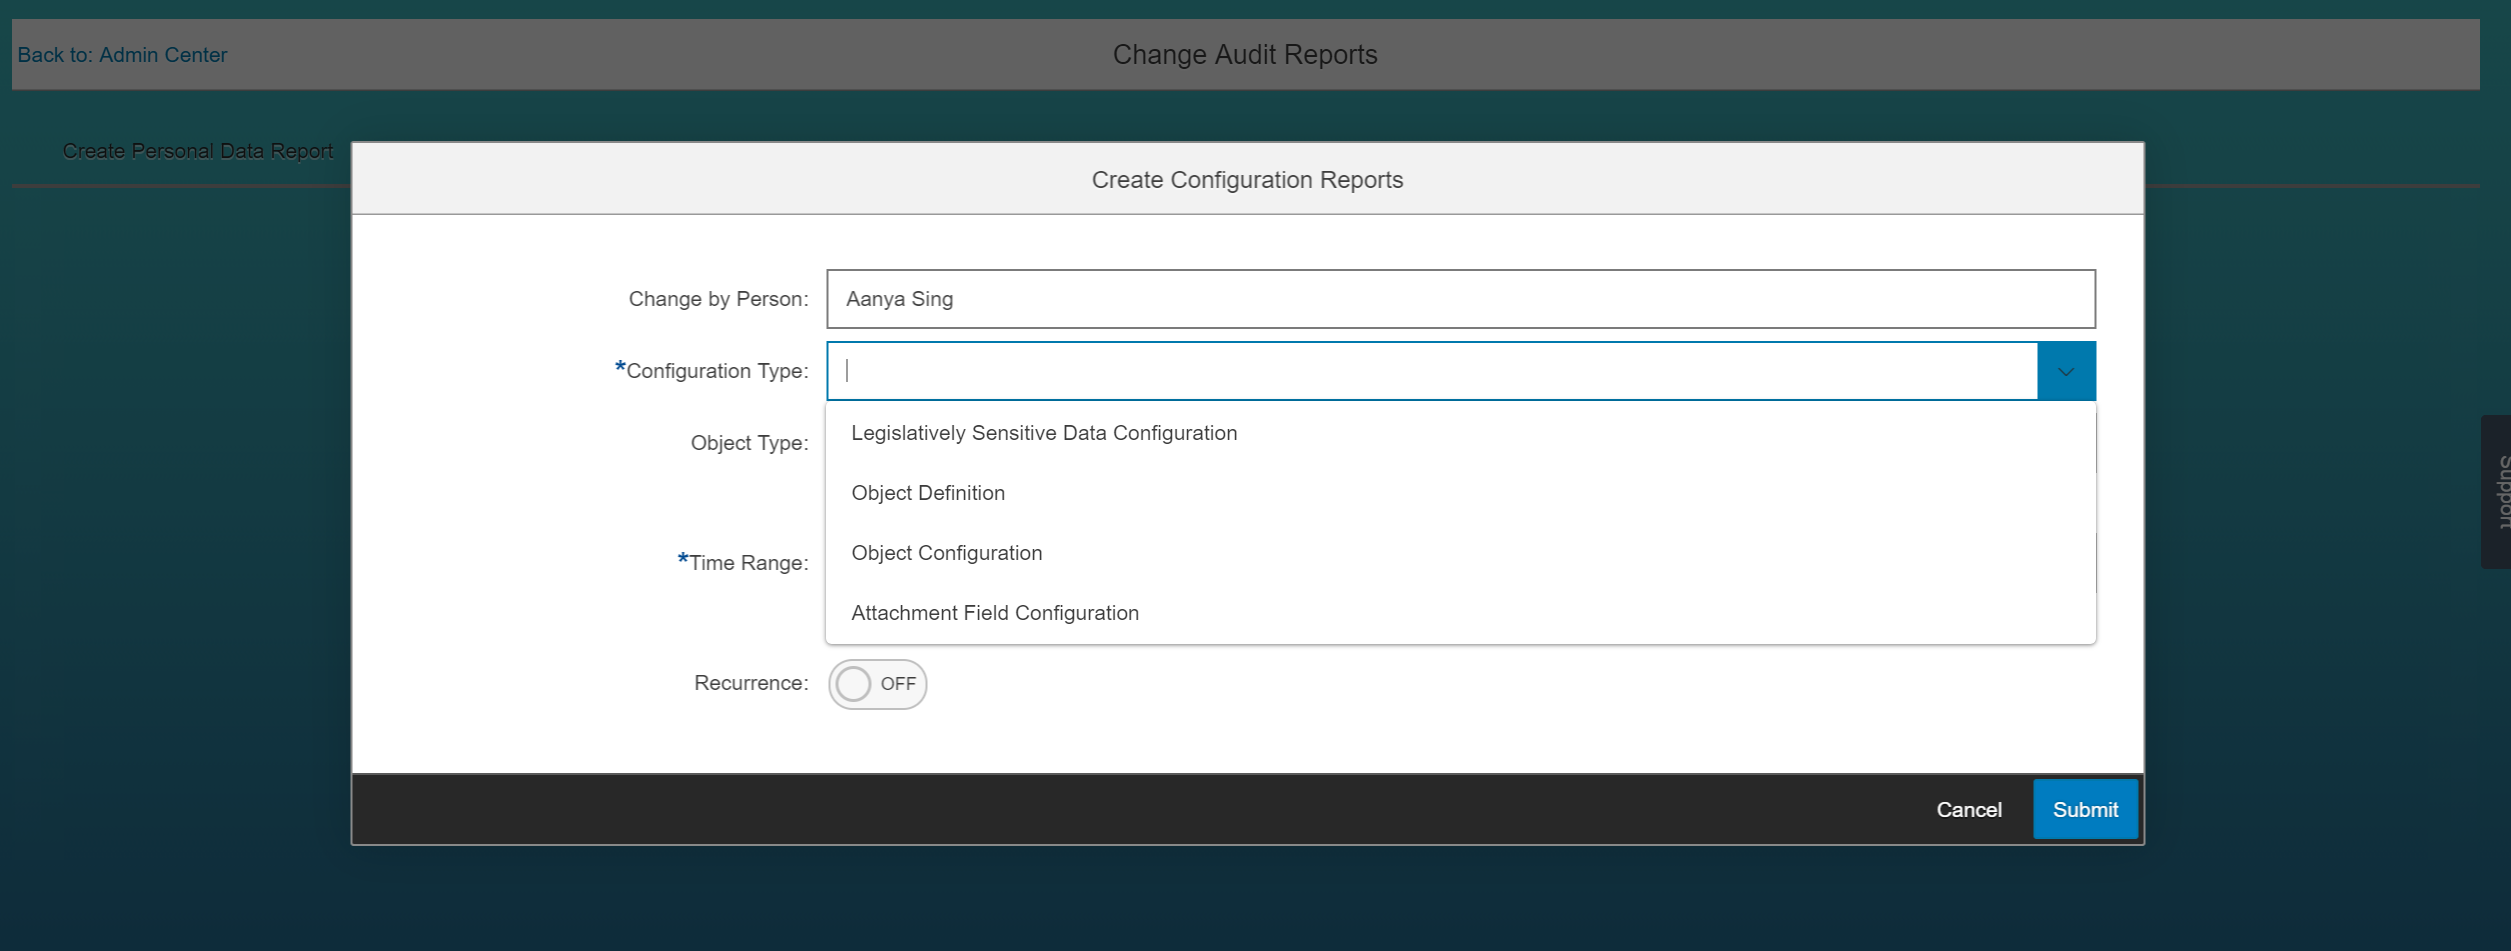 Create Configuration Reports - MDF Data.png